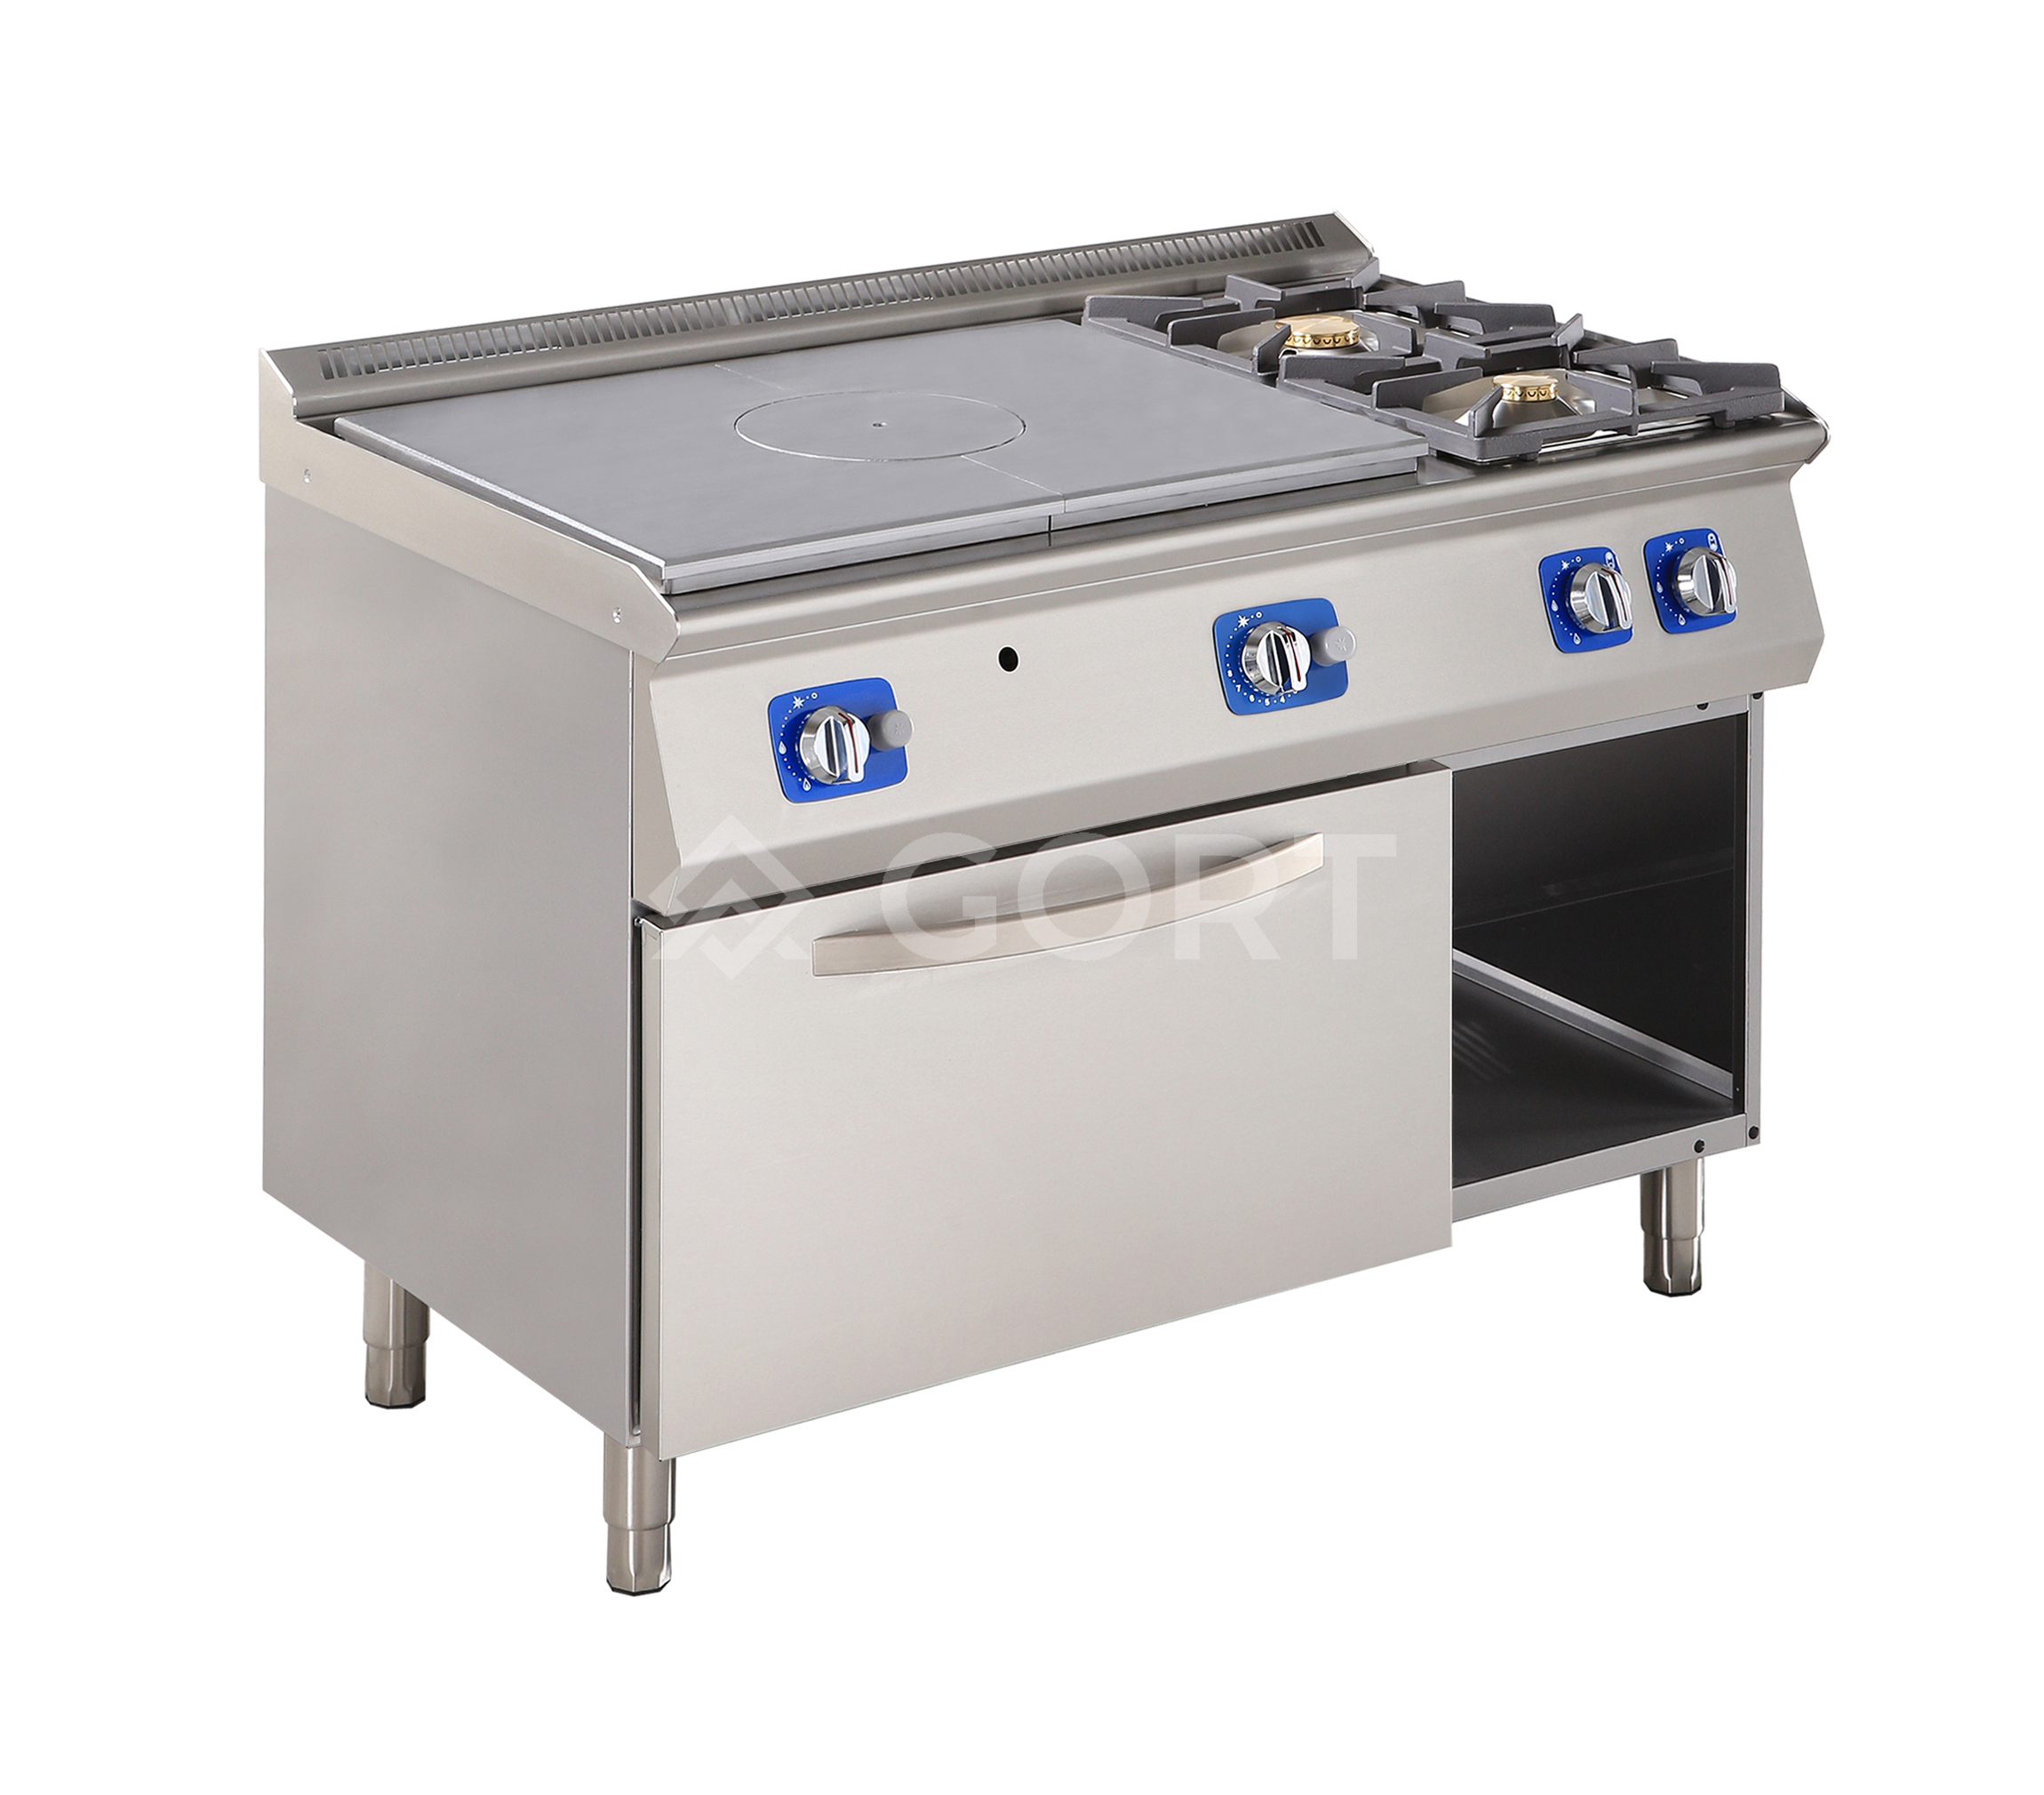 Gas solid top with 2 burner gas cooking range on gas oven